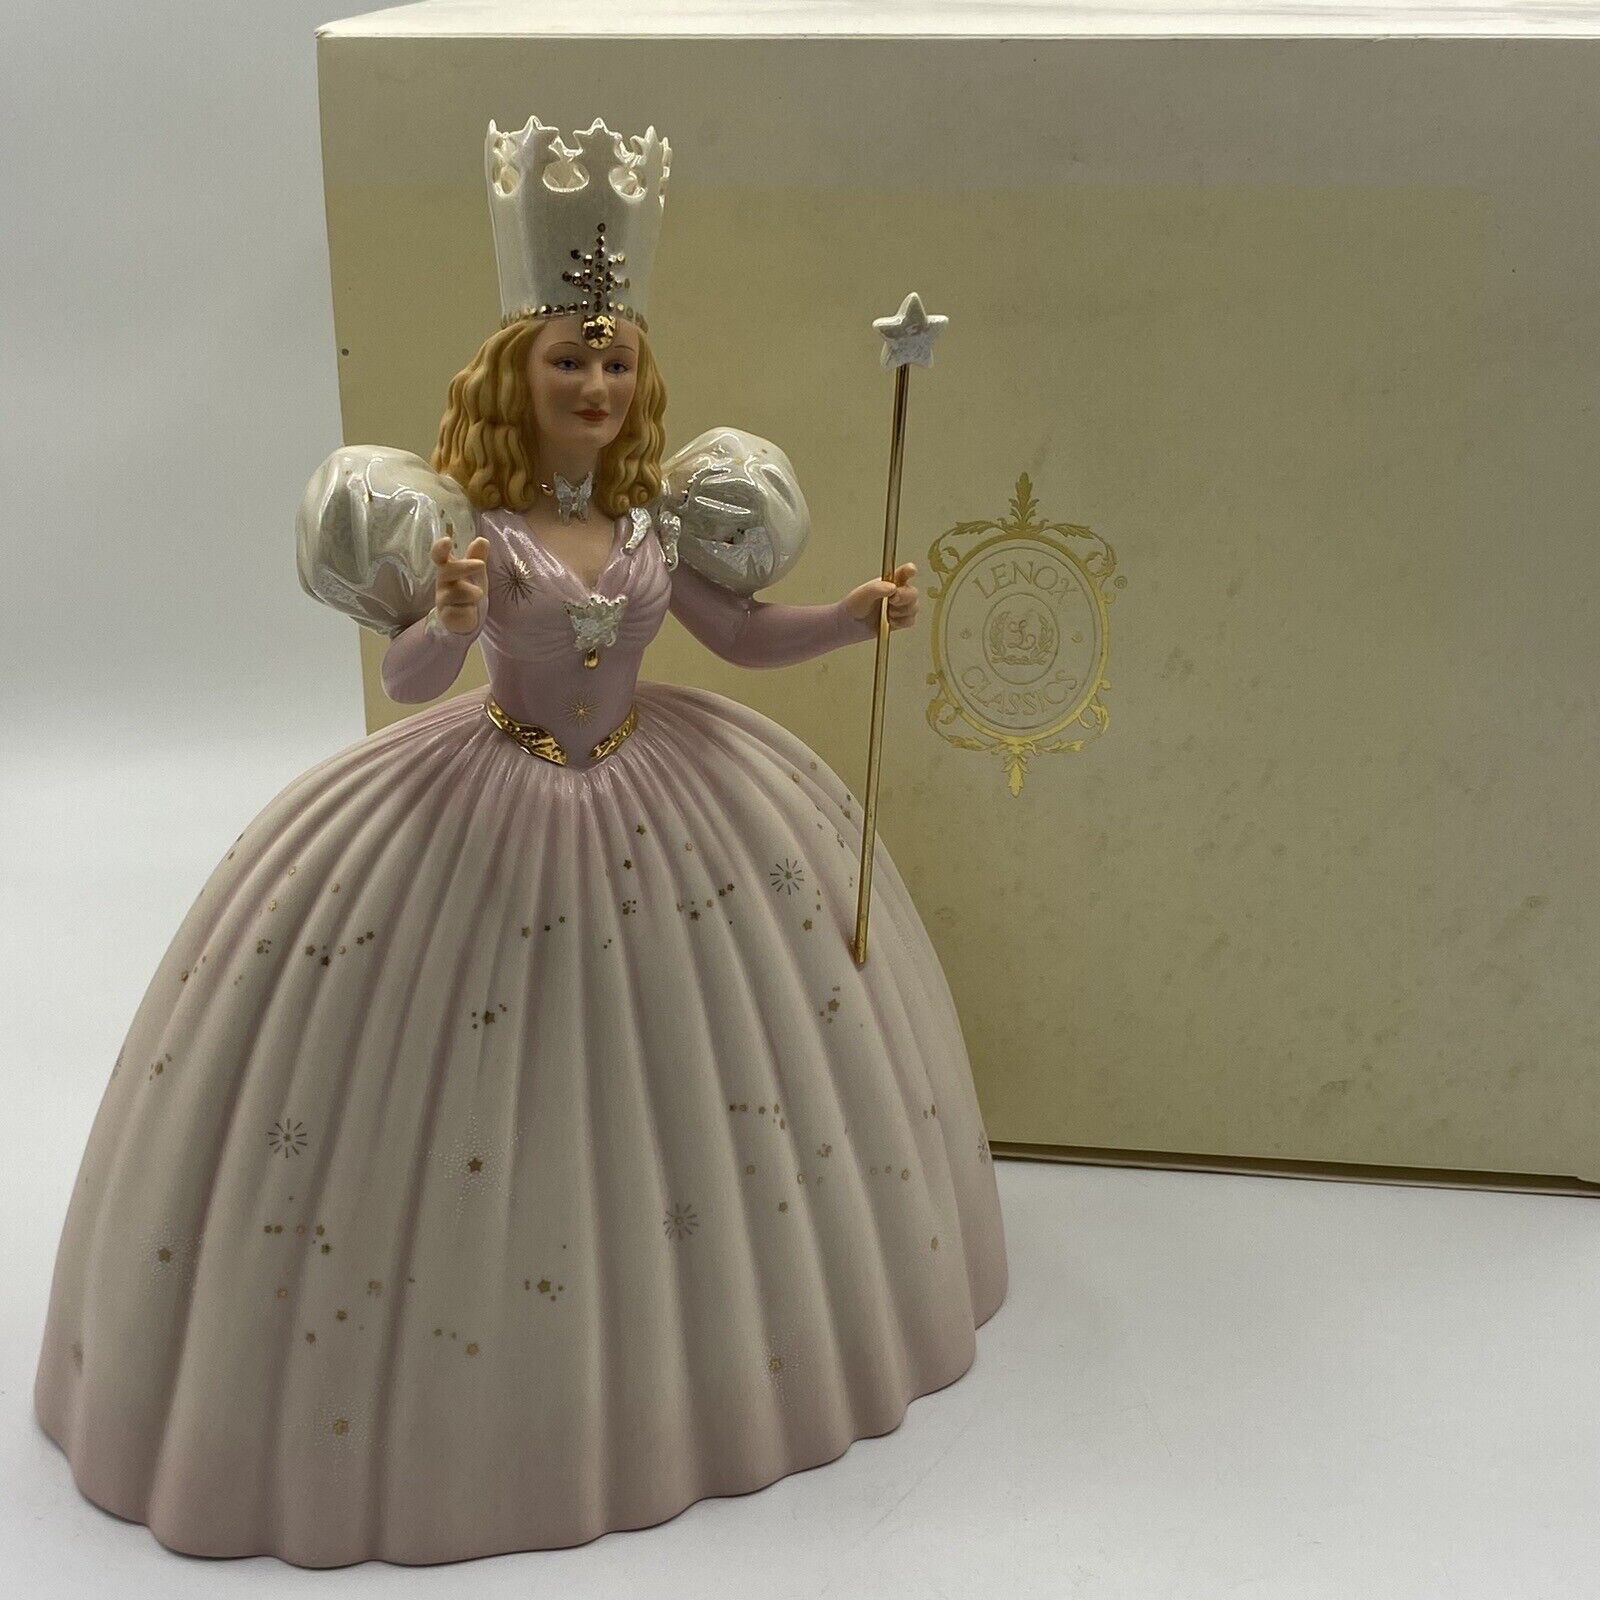 Classic The Wizard of Oz Glinda The Good Witch Lenox Figurine Collectable